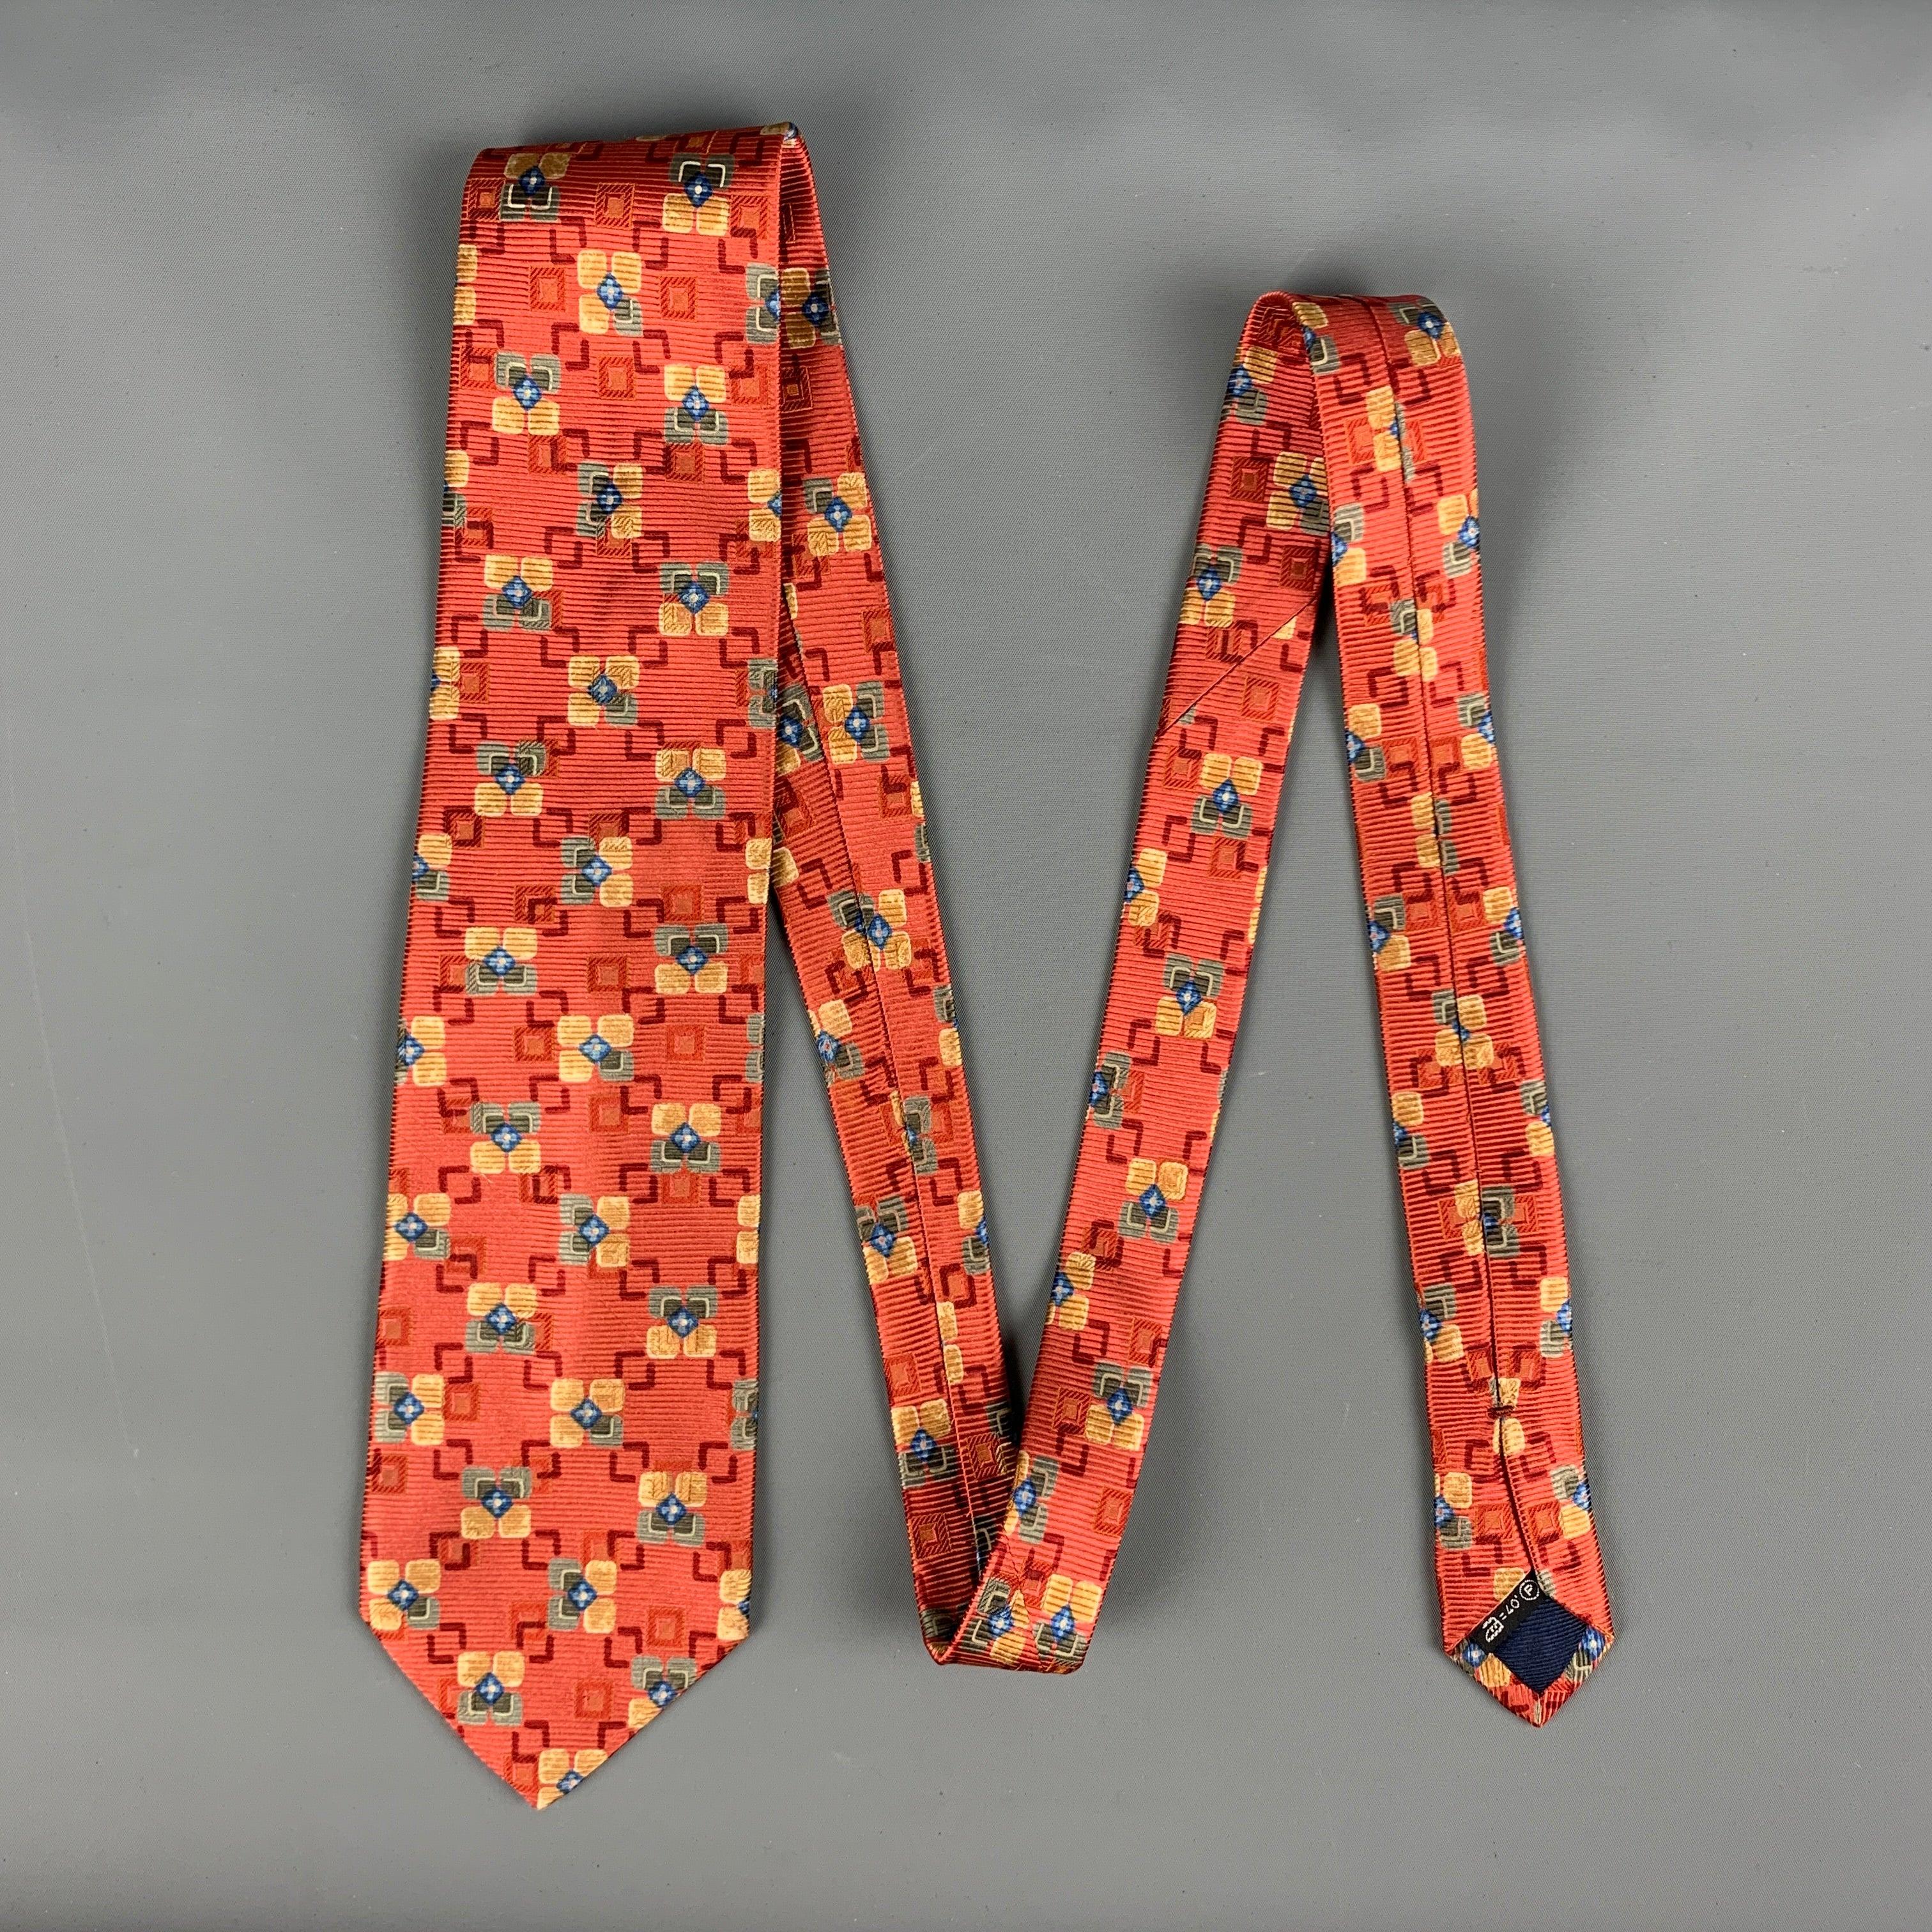 ERMENEGILDO ZEGNA necktie comes in red featuring a multicolored geometric floral print. Made in Italy.
Very Good Pre-Owned Condition
 

Measurements: 
  Width: 3 inches Length: 60 inches 

  
  
 
Reference: 124773
Category: Tie
More Details
   